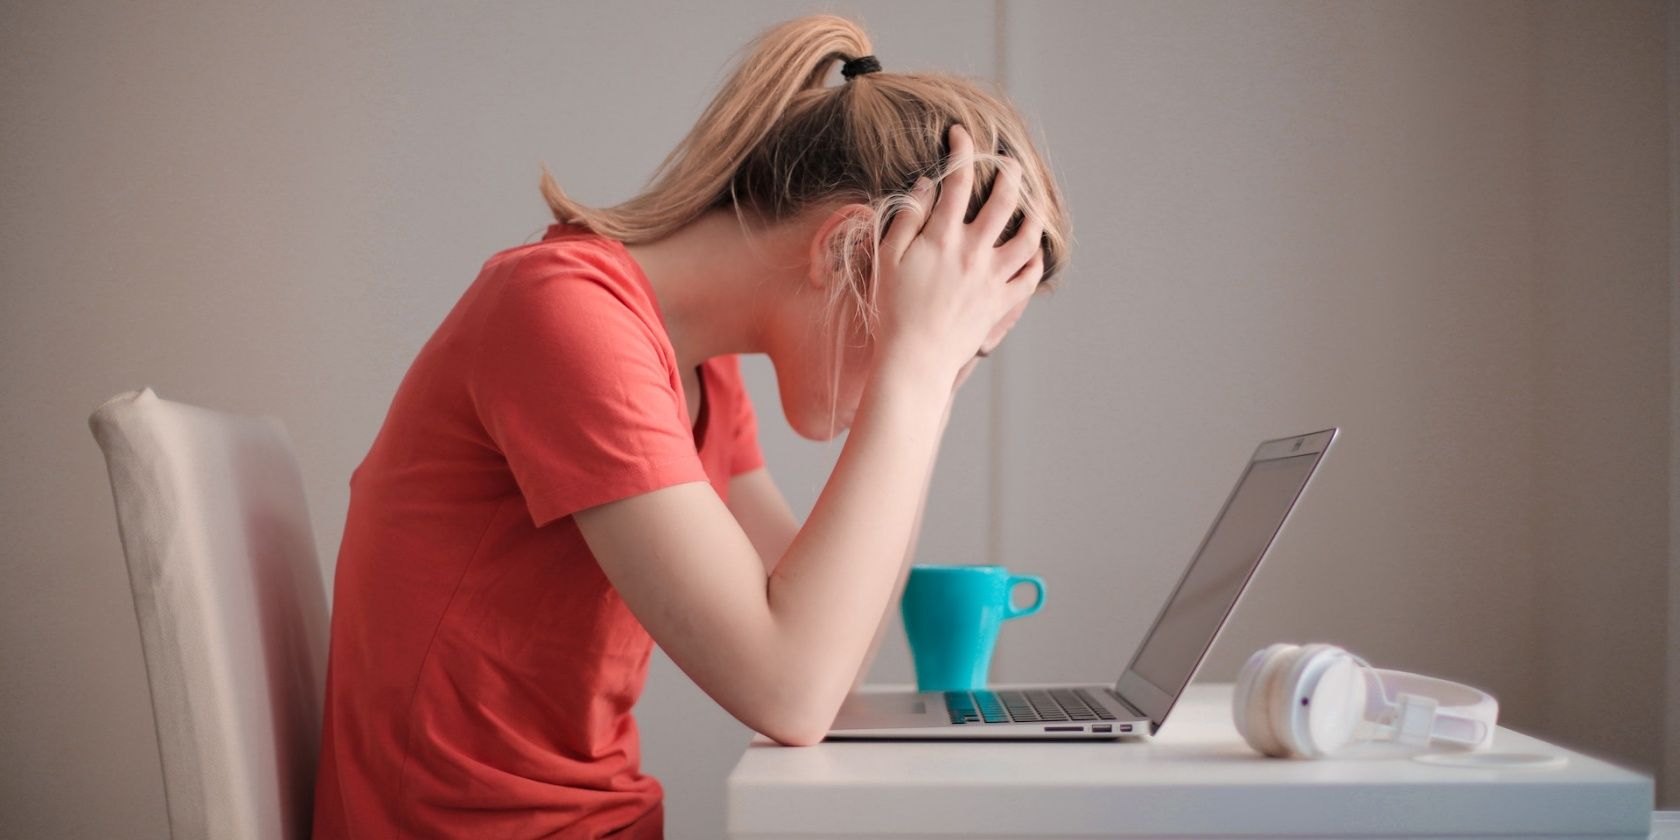 Girl with a pony tail holding her head in frustration in front of her laptop